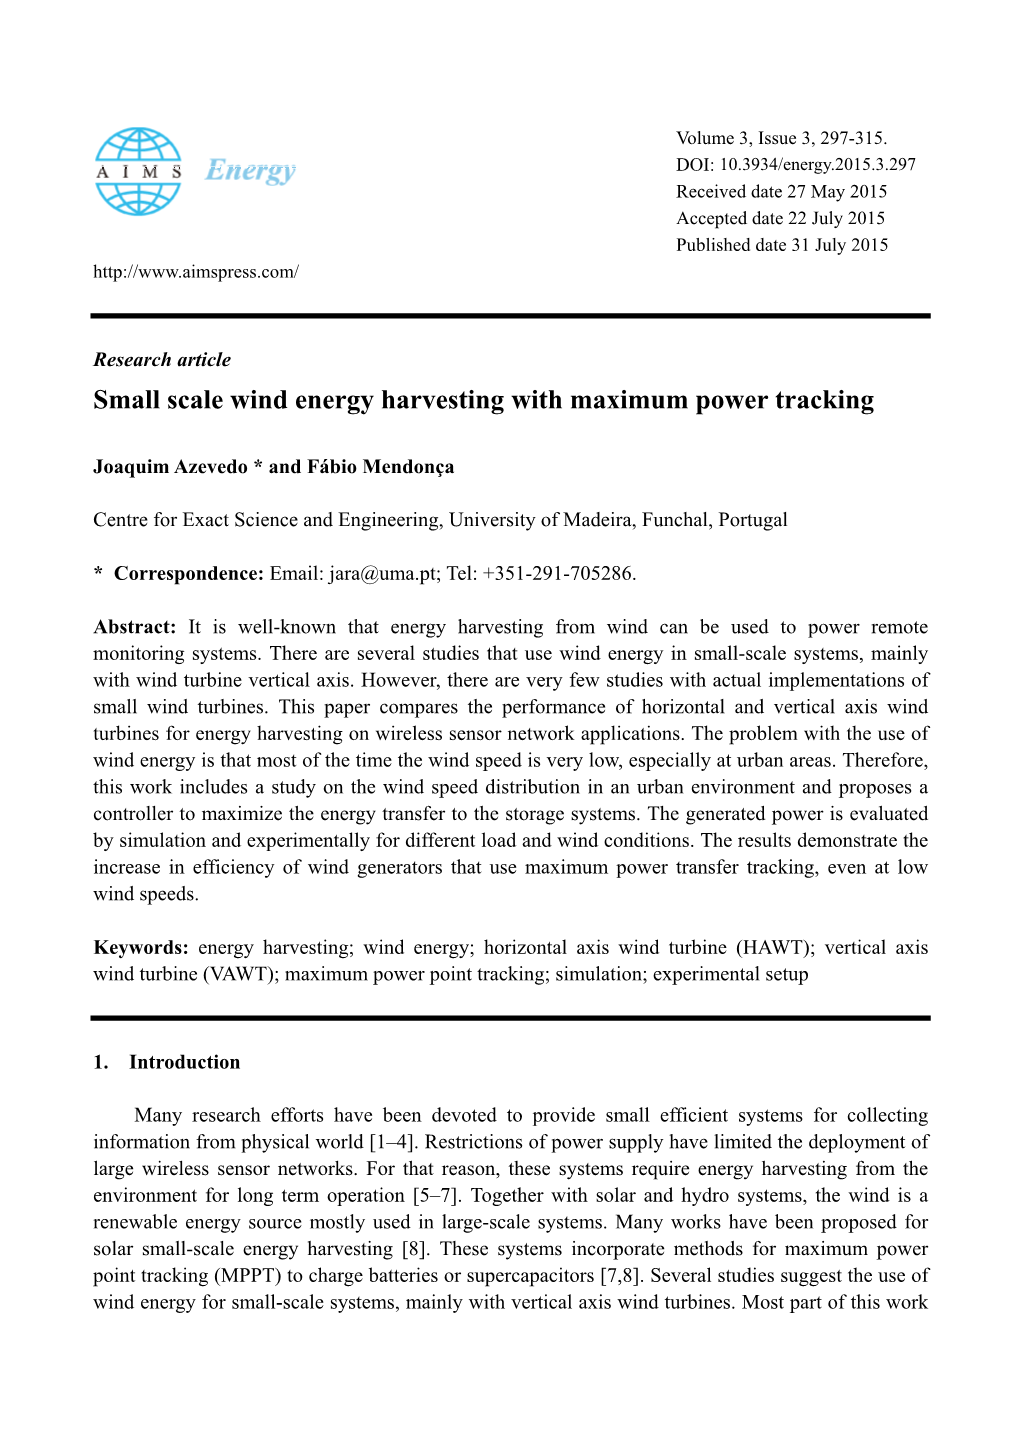 Small Scale Wind Energy Harvesting with Maximum Power Tracking